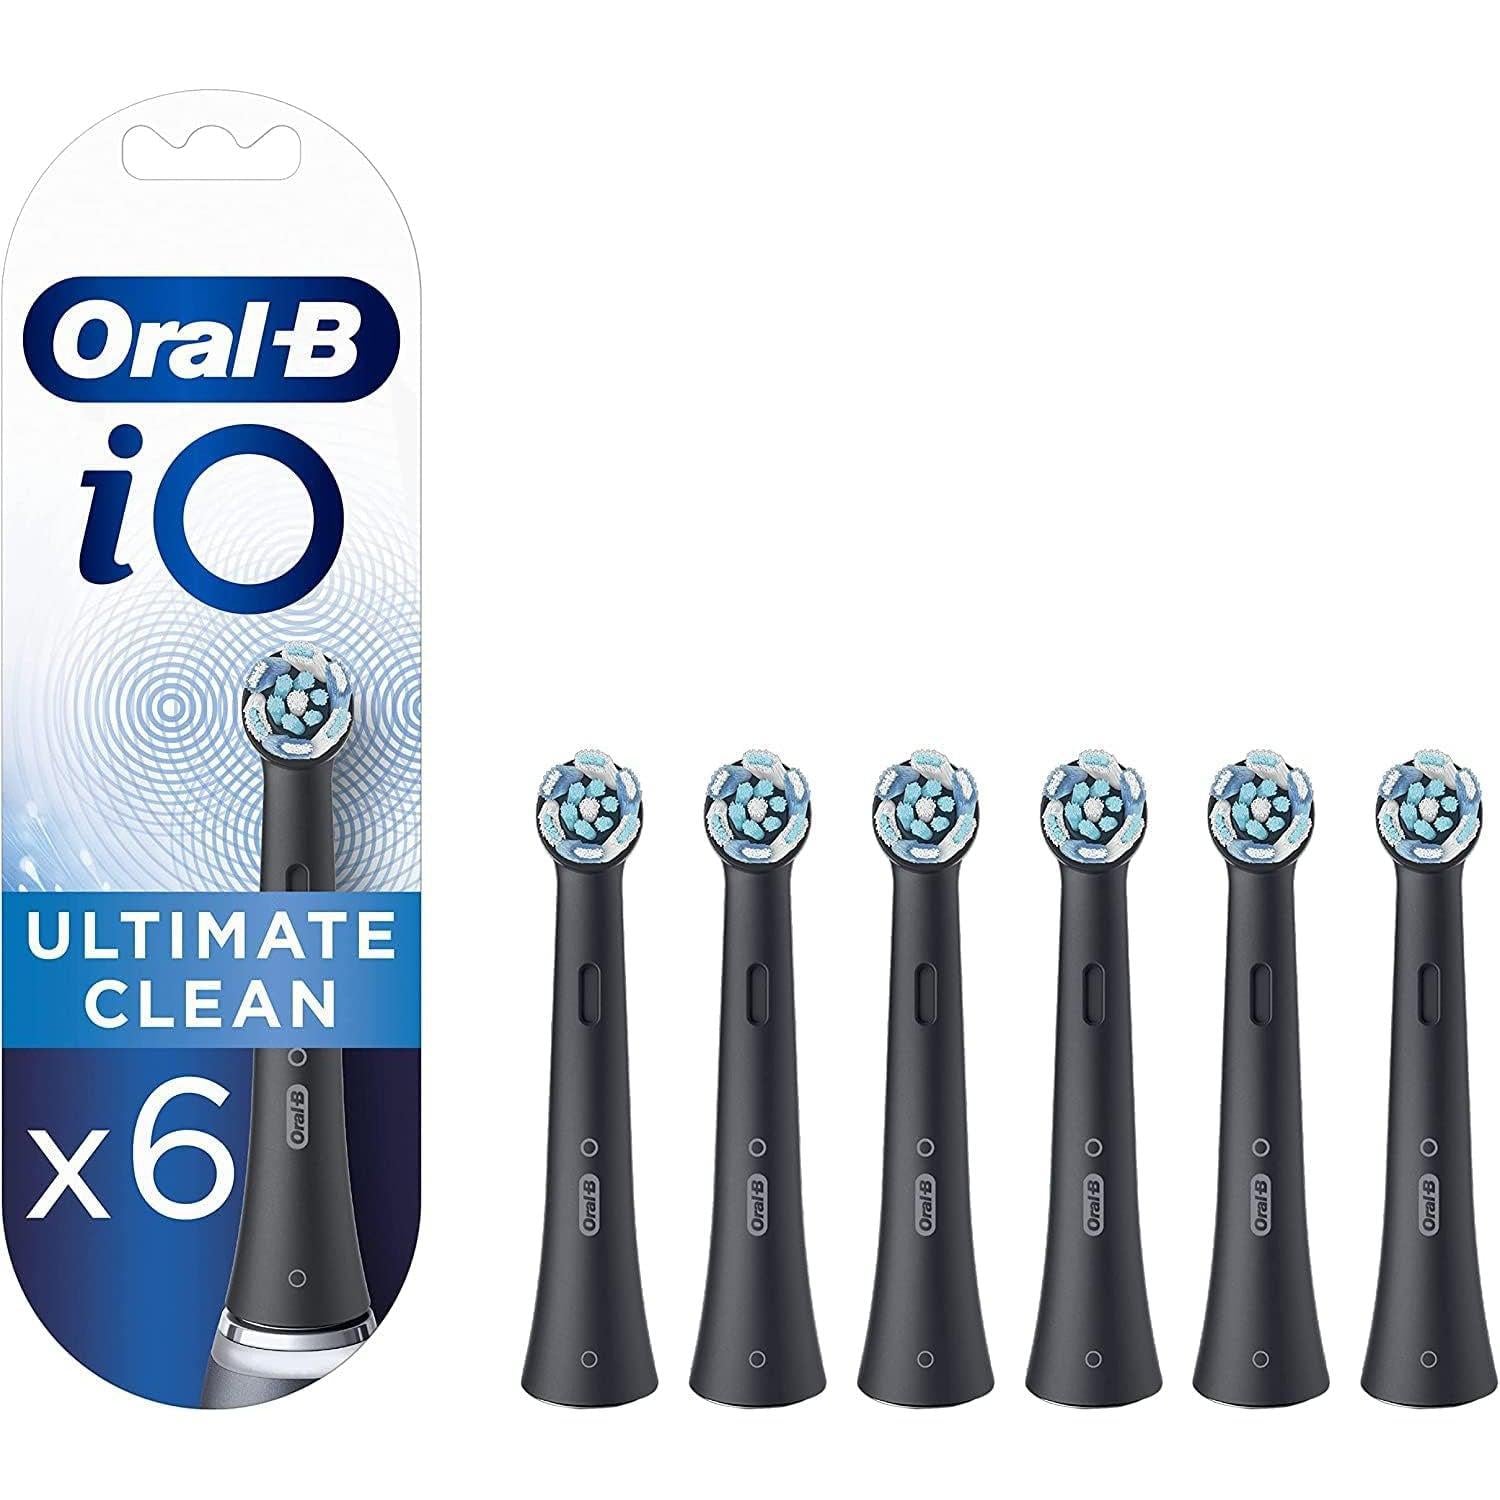 Oral-B iO 6pk Ultimate Clean Toothbrush Replacement Heads - Black